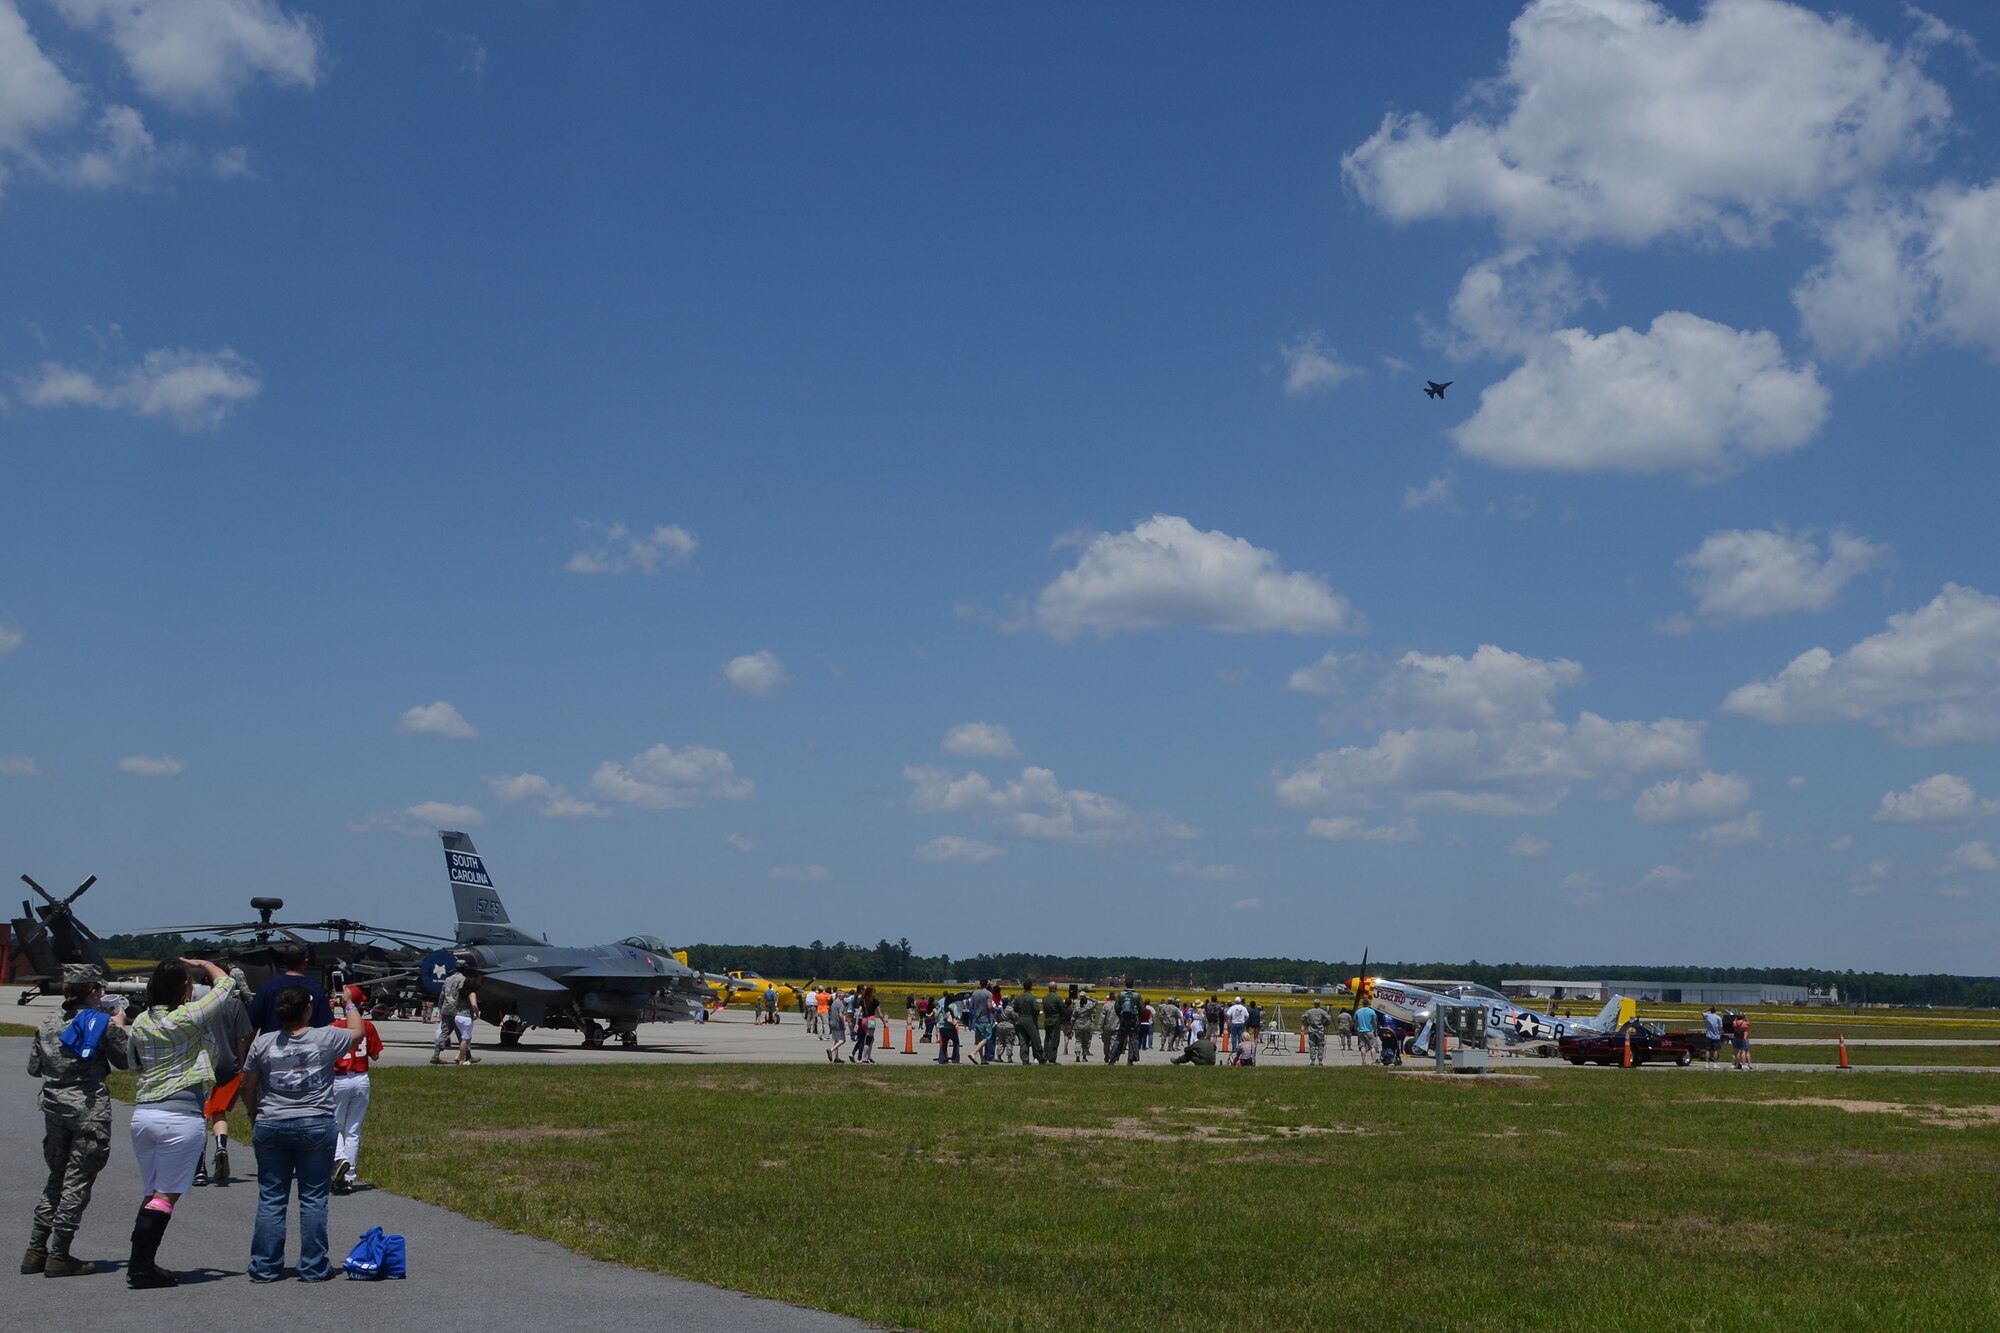 Swamp Fox Airmen and families gather for fun and fellowship during the 169th Fighter Wing Family Day at McEntire Joint National Guard Base, S.C., May 2, 2015. Local businesses and base support programs provided food and event activities to show their appreciation for the continued service of South Carolina Air National  Guard and 169th Fighter Wing families and Airmen. (U.S. Air National Guard photo by Senior Master Sgt. Edward Snyder/Released)